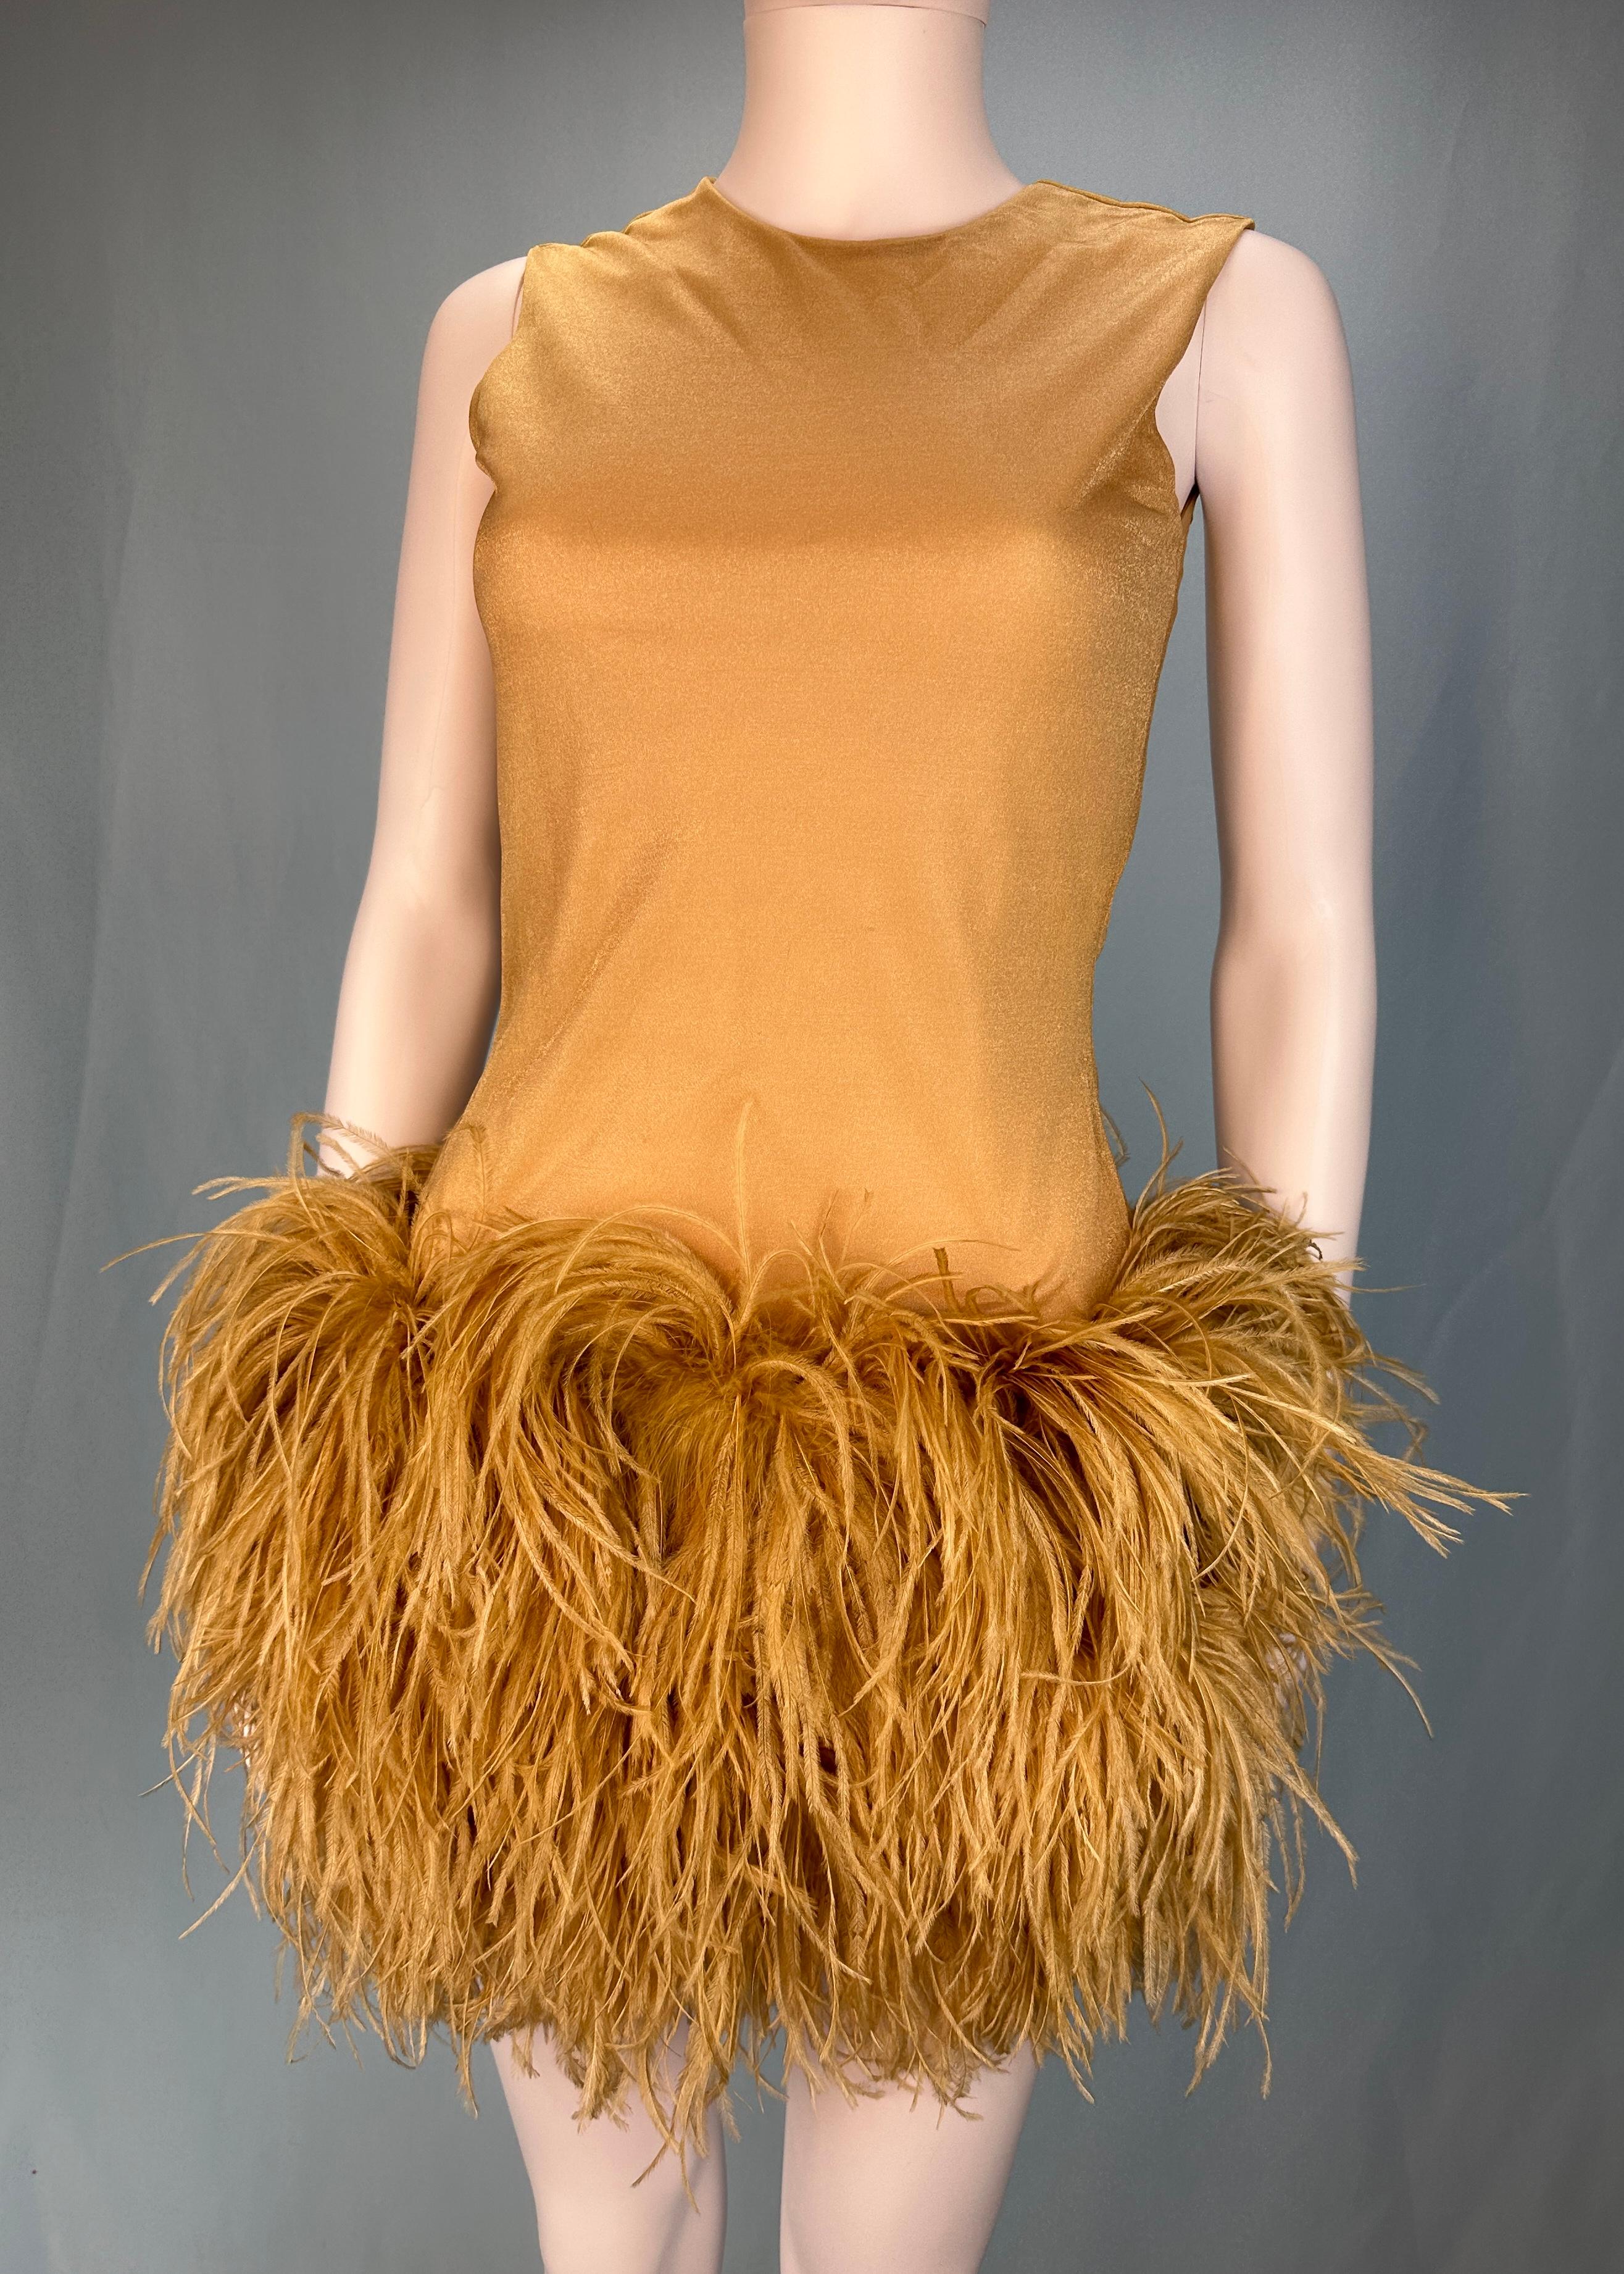 Helmut Lang Fall 1990 Runway Feather Trim Dress For Sale 1